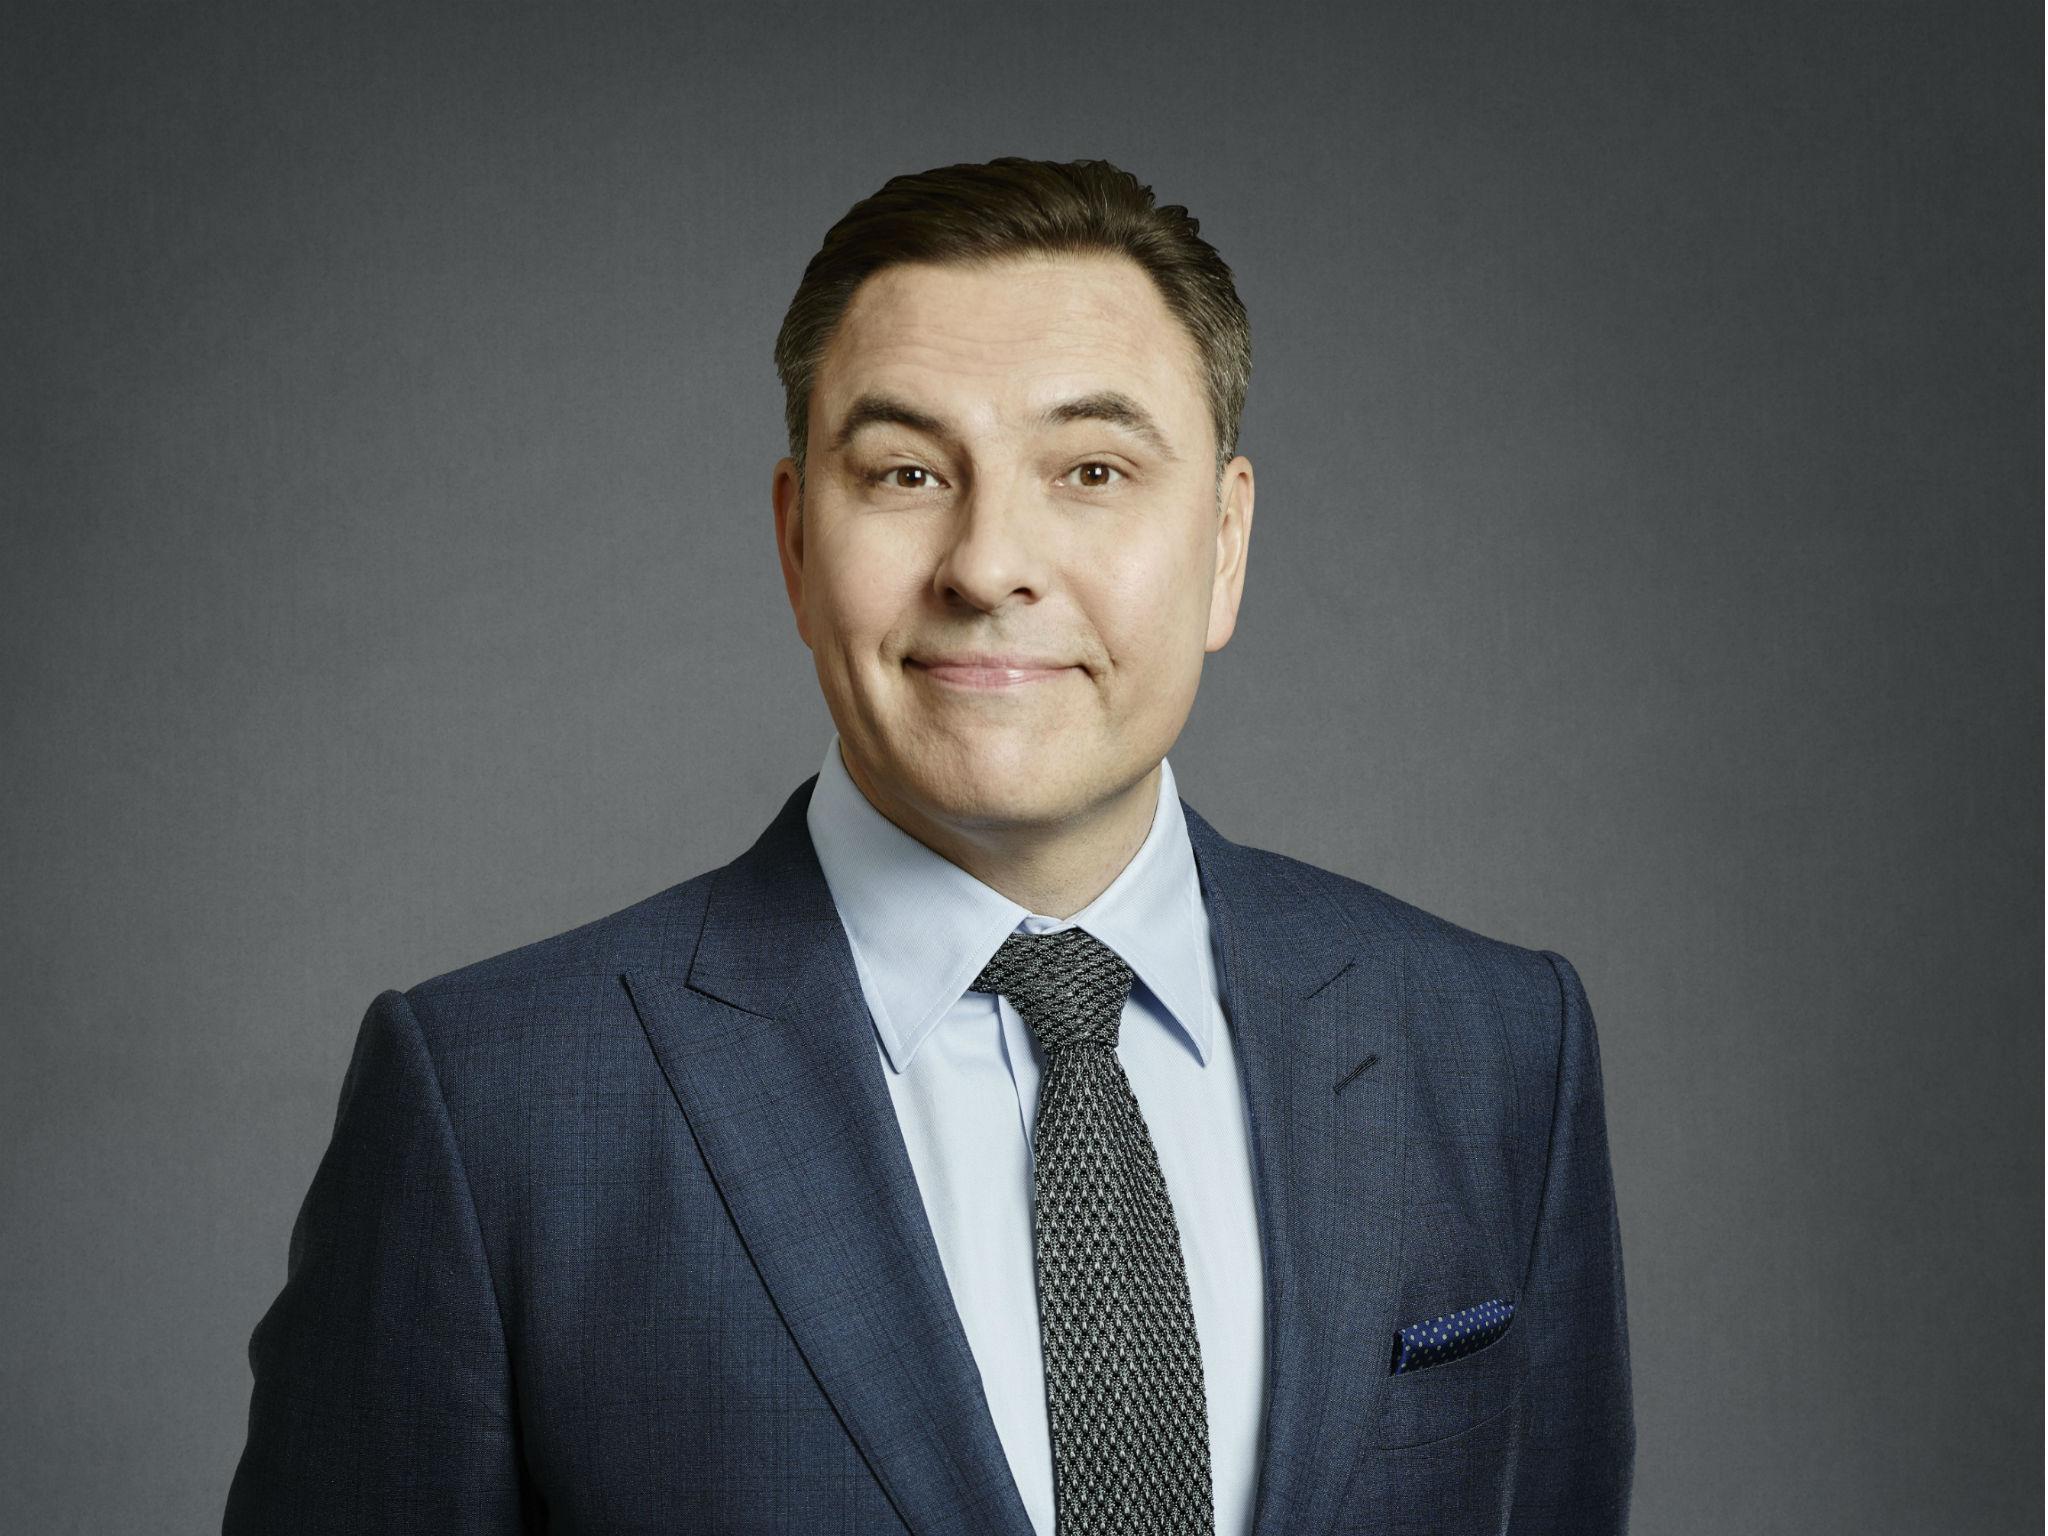 Walliams will return to ‘Britain's Got Talent' after his stint with ‘The Nightly Show’